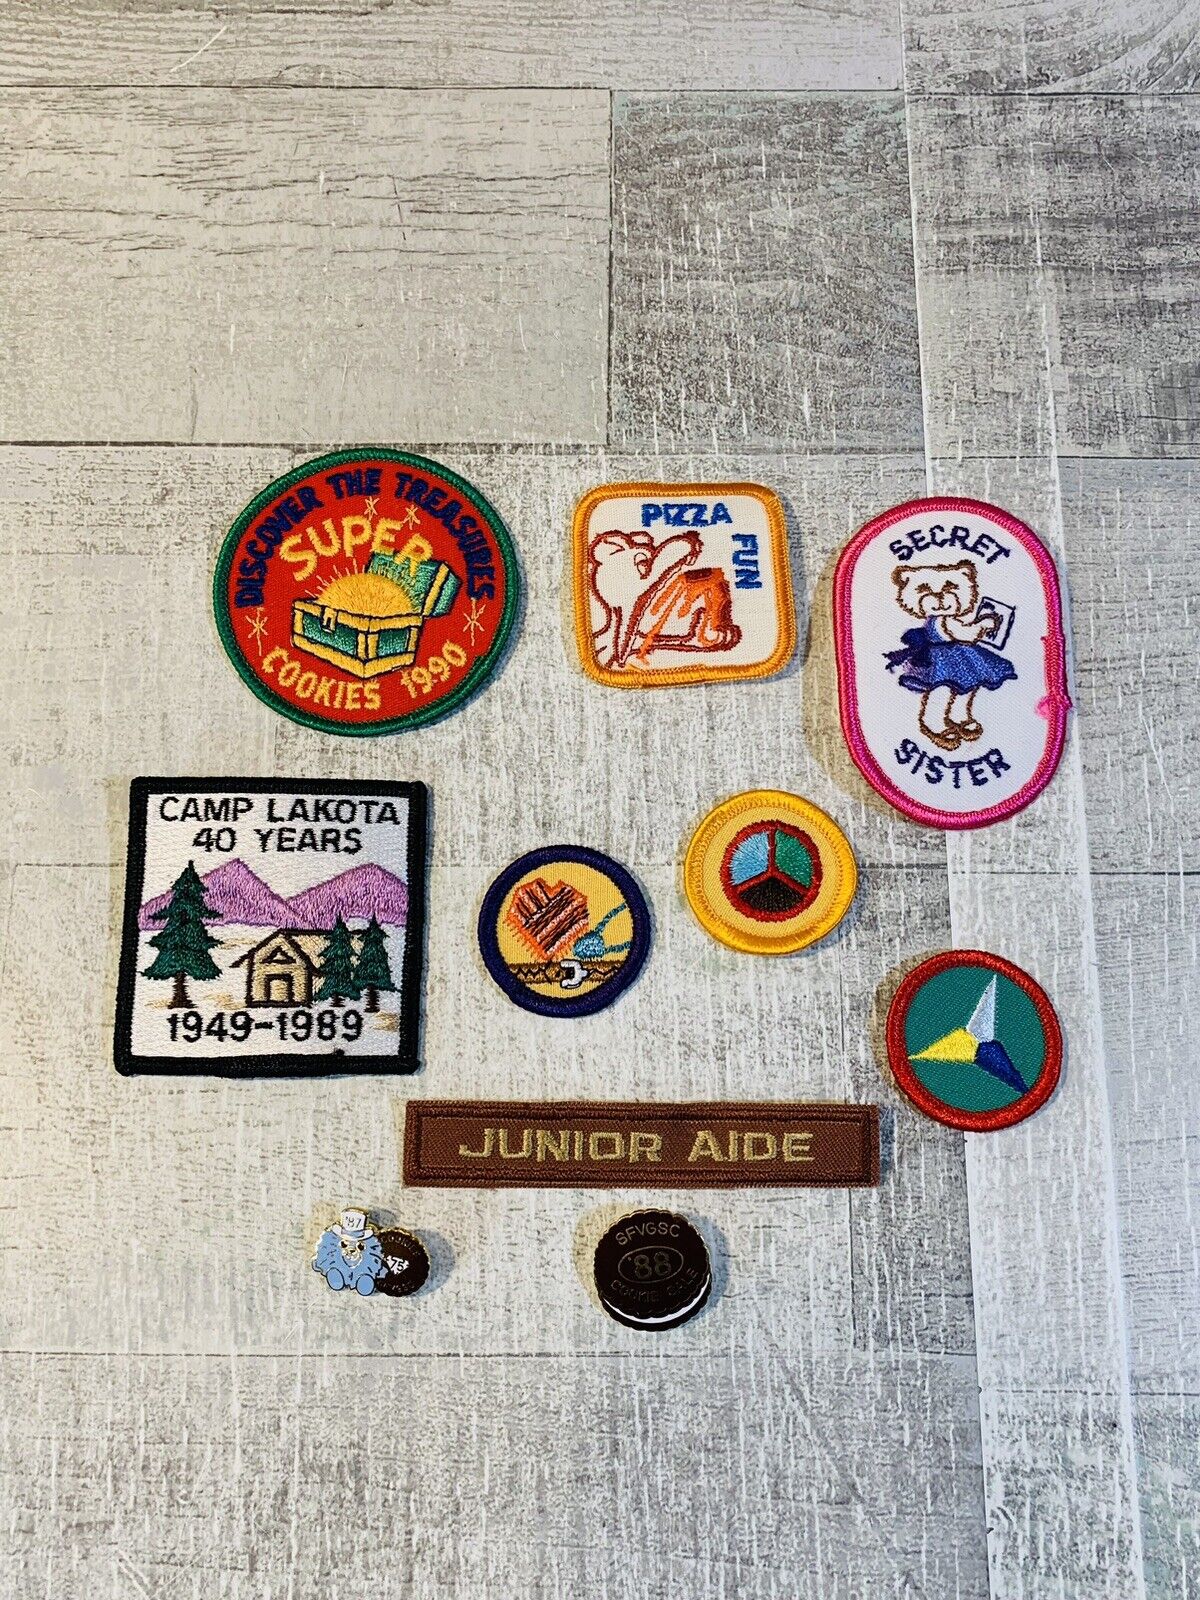 Vintage 1980s Girl Scout Patches And Pins Lot Of 10 Unworn Excellent Condition